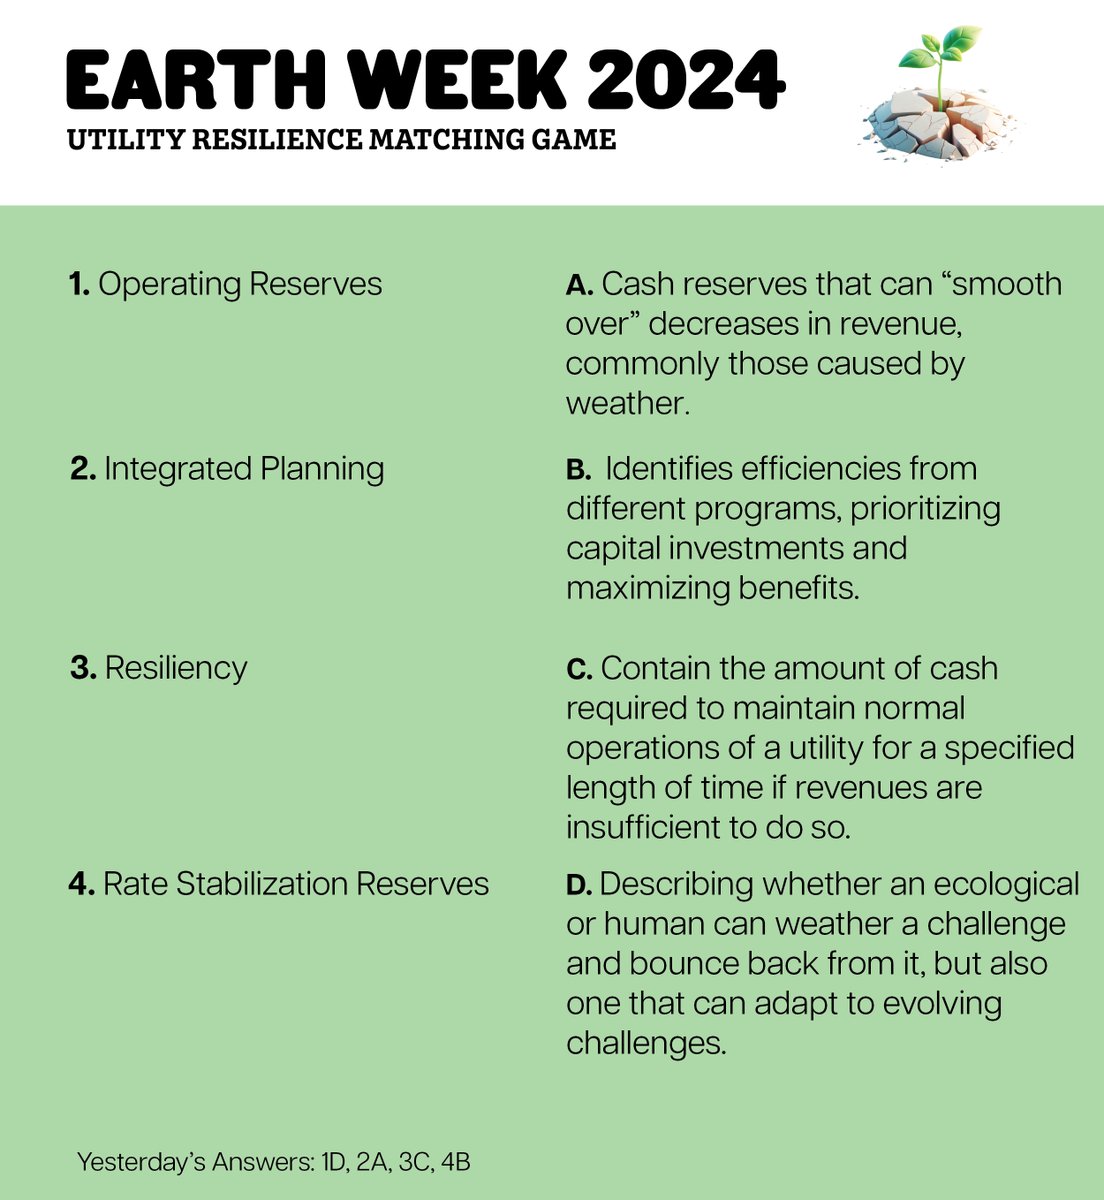 It's Friday! 🎉 Today's matching game is on utility resilience, and the answers to yesterday's game are printed at the bottom. How many did you get right? Comment below! #Resilience #EarthWeek #EFC